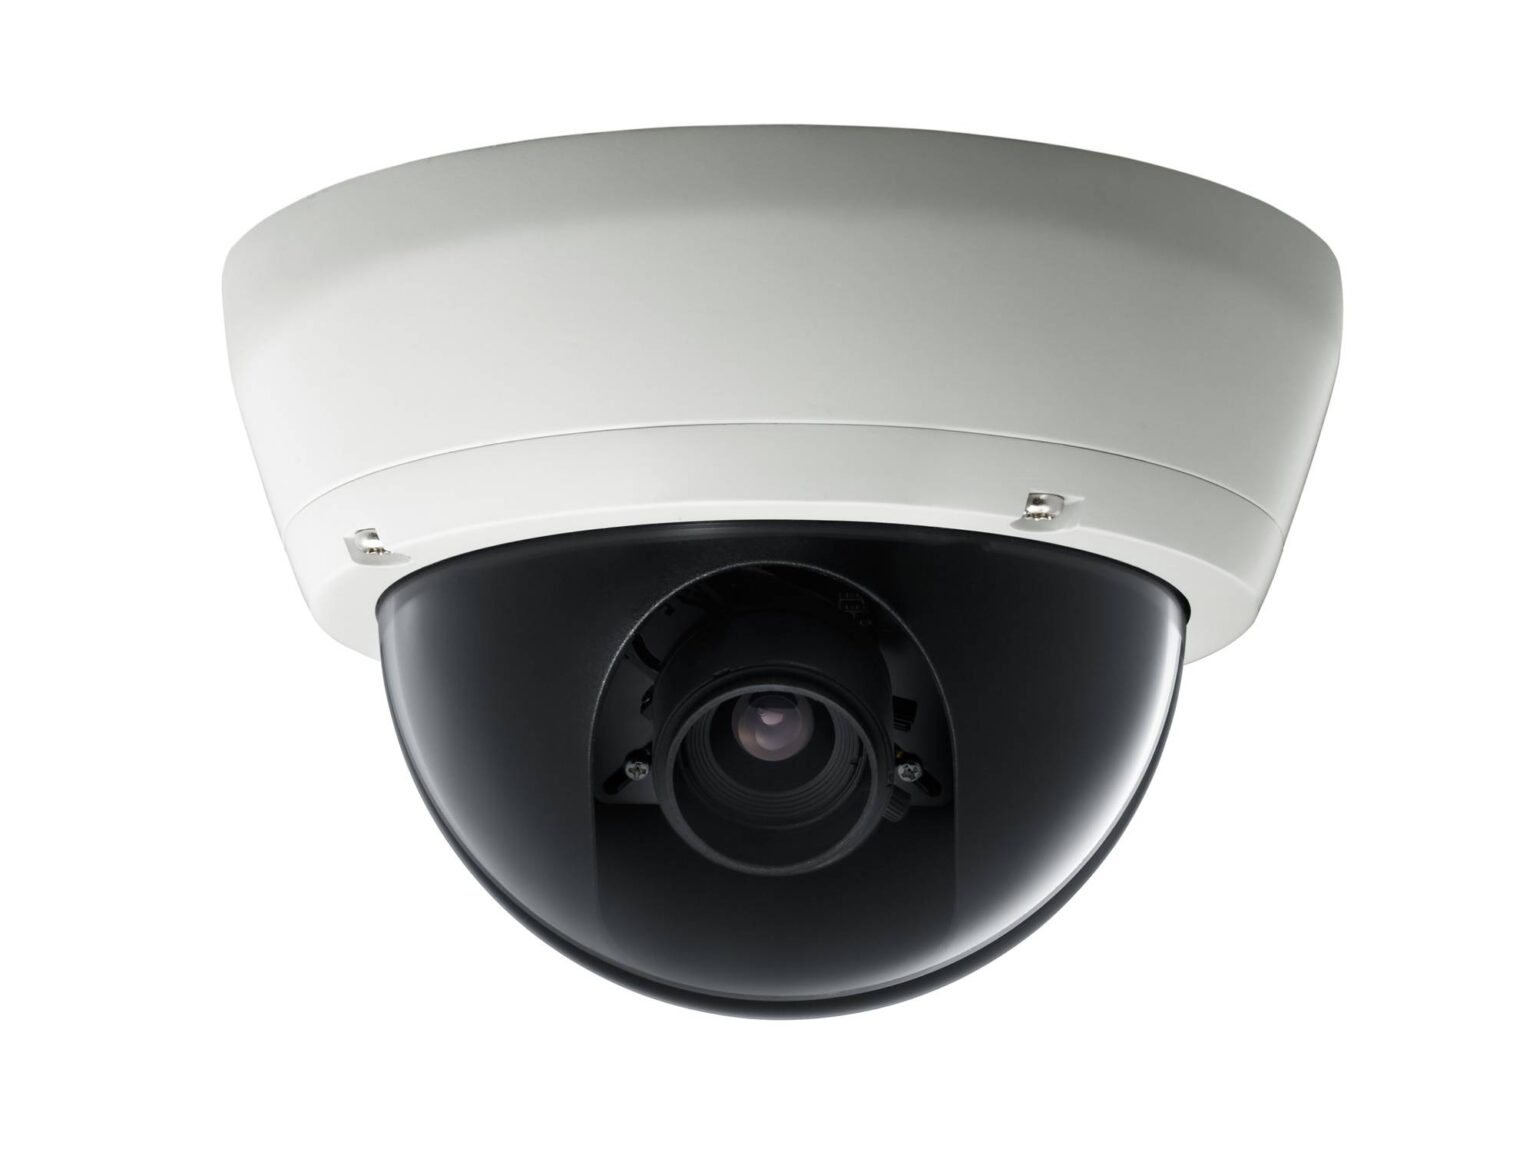 CCTV Security Camera | Global Security Technologies | Because security matters